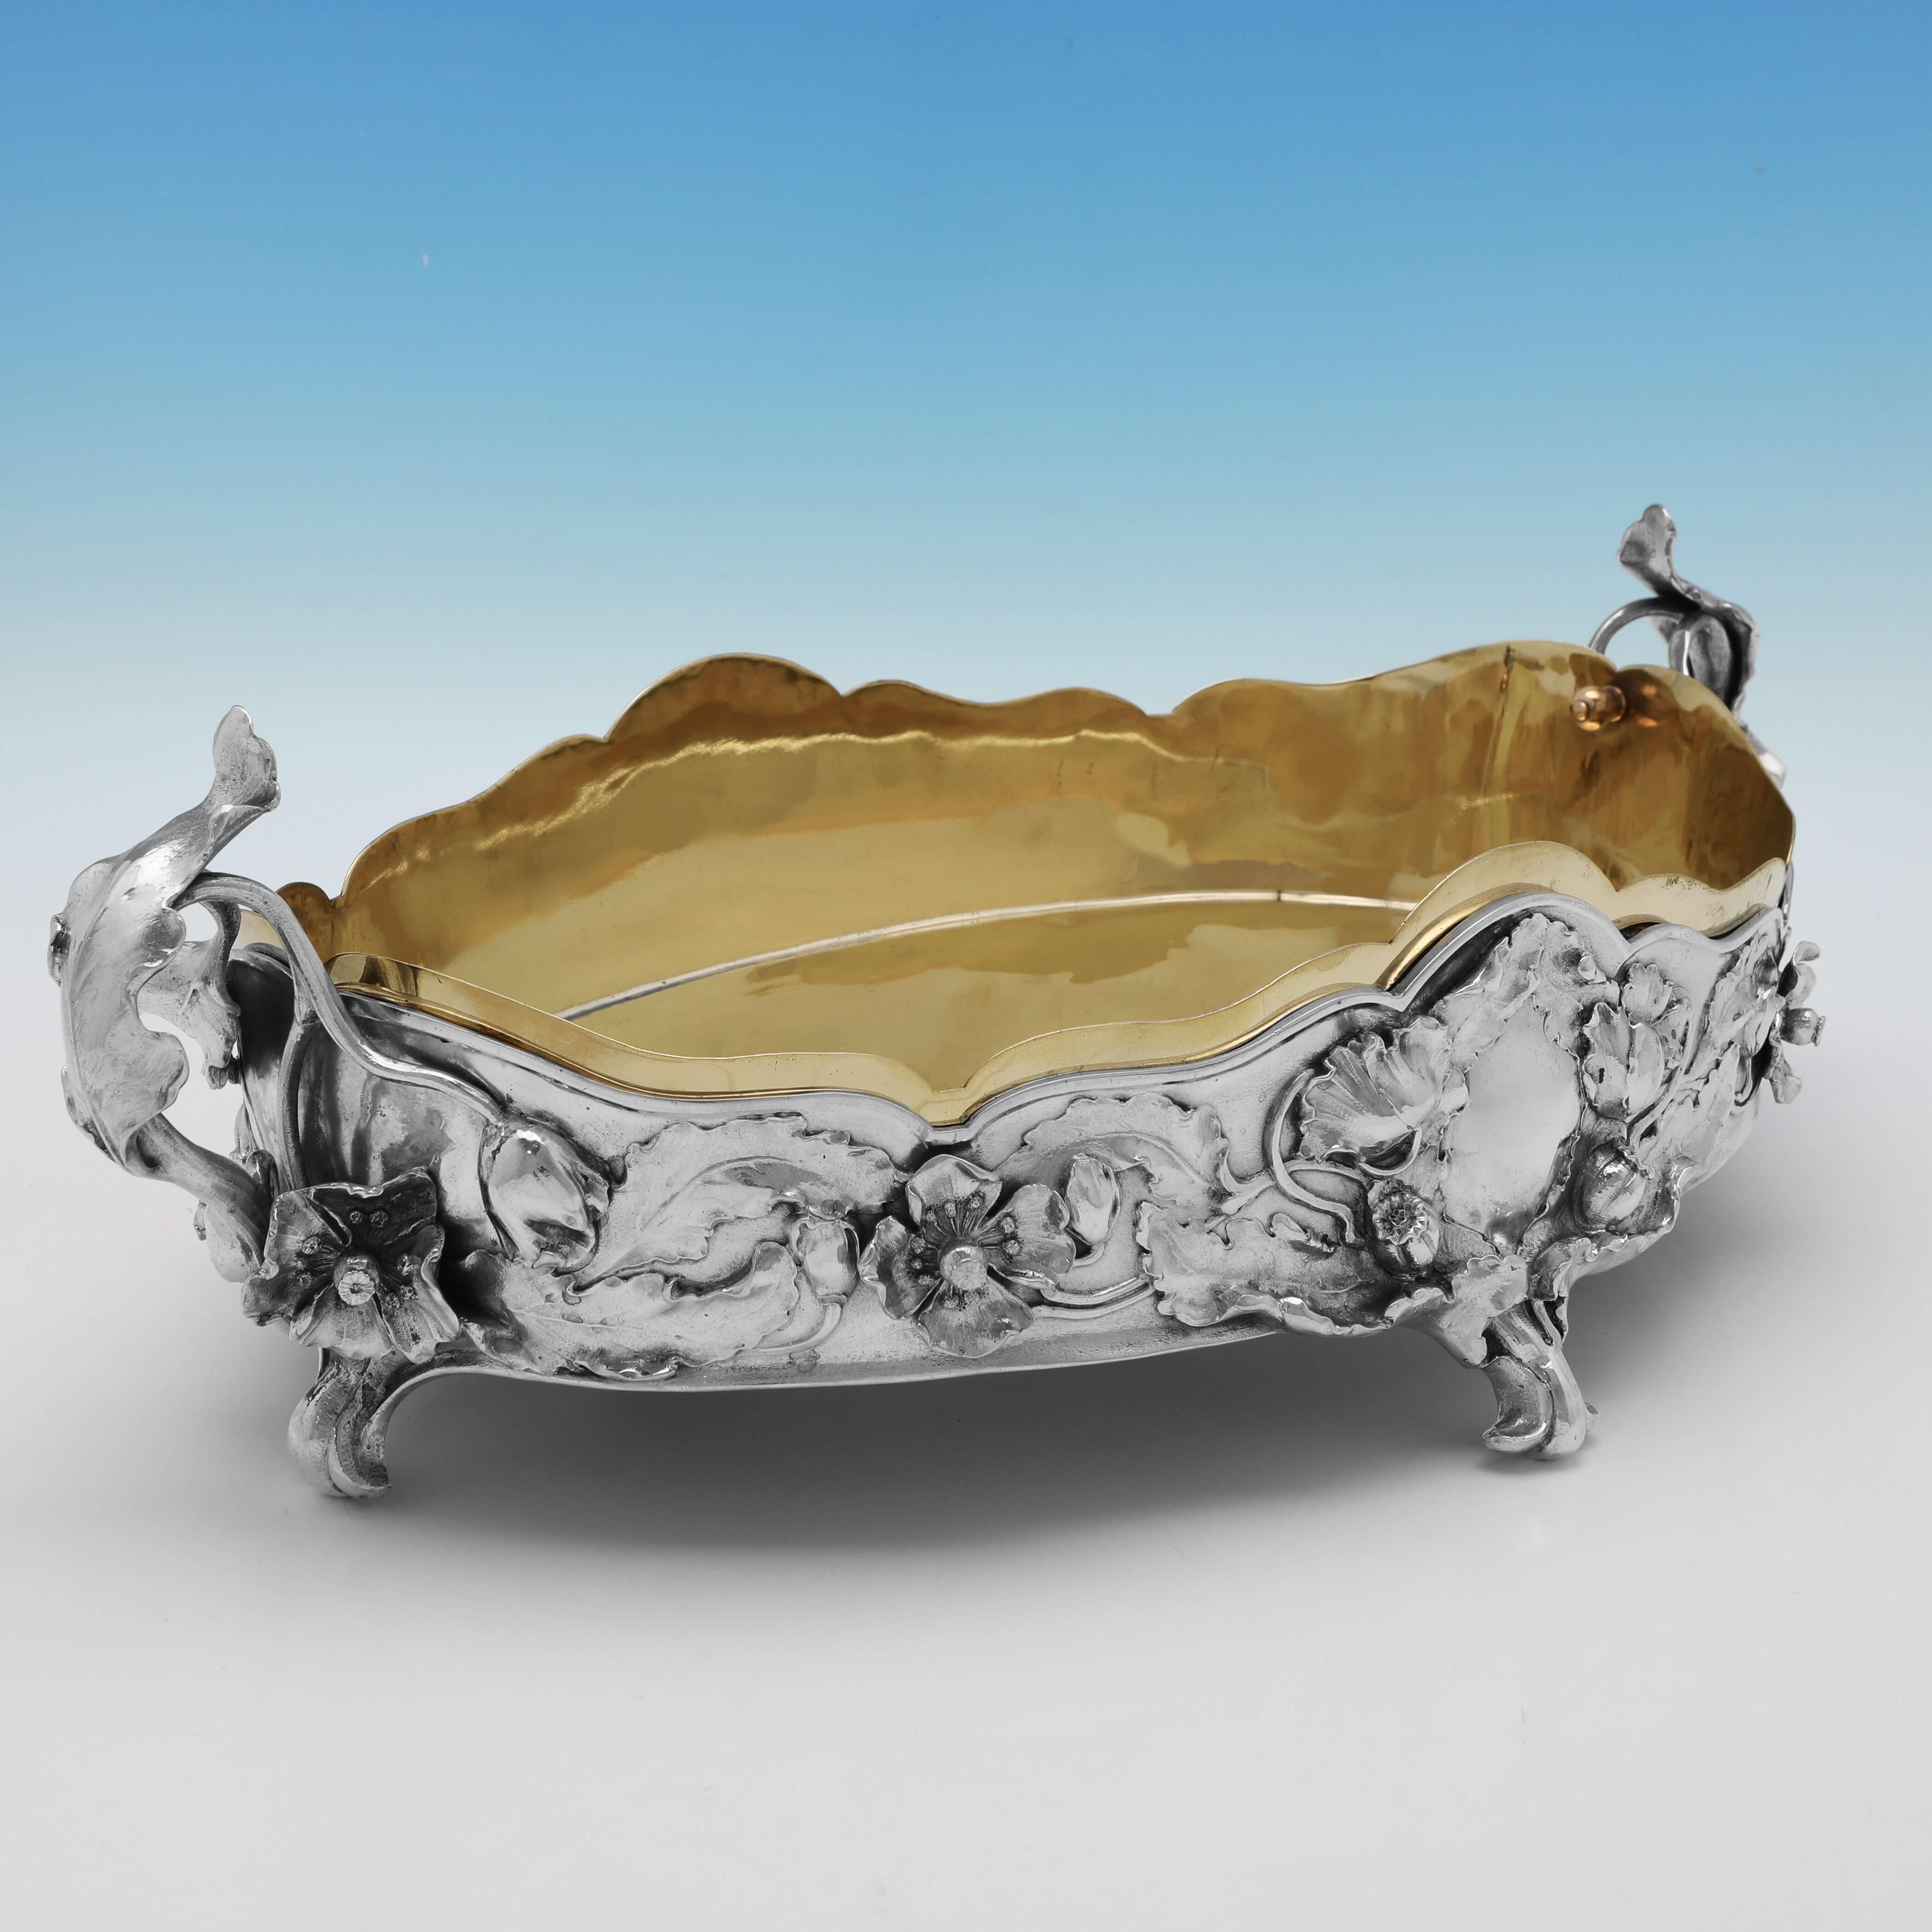 Made circa 1890 in Hanau by Storck & Sinsheimer, this striking, 800 standard, Antique Silver Jardinière, is in the Art Nouveau taste, and features a removable gilt metal liner. 

The jardinière measures 6